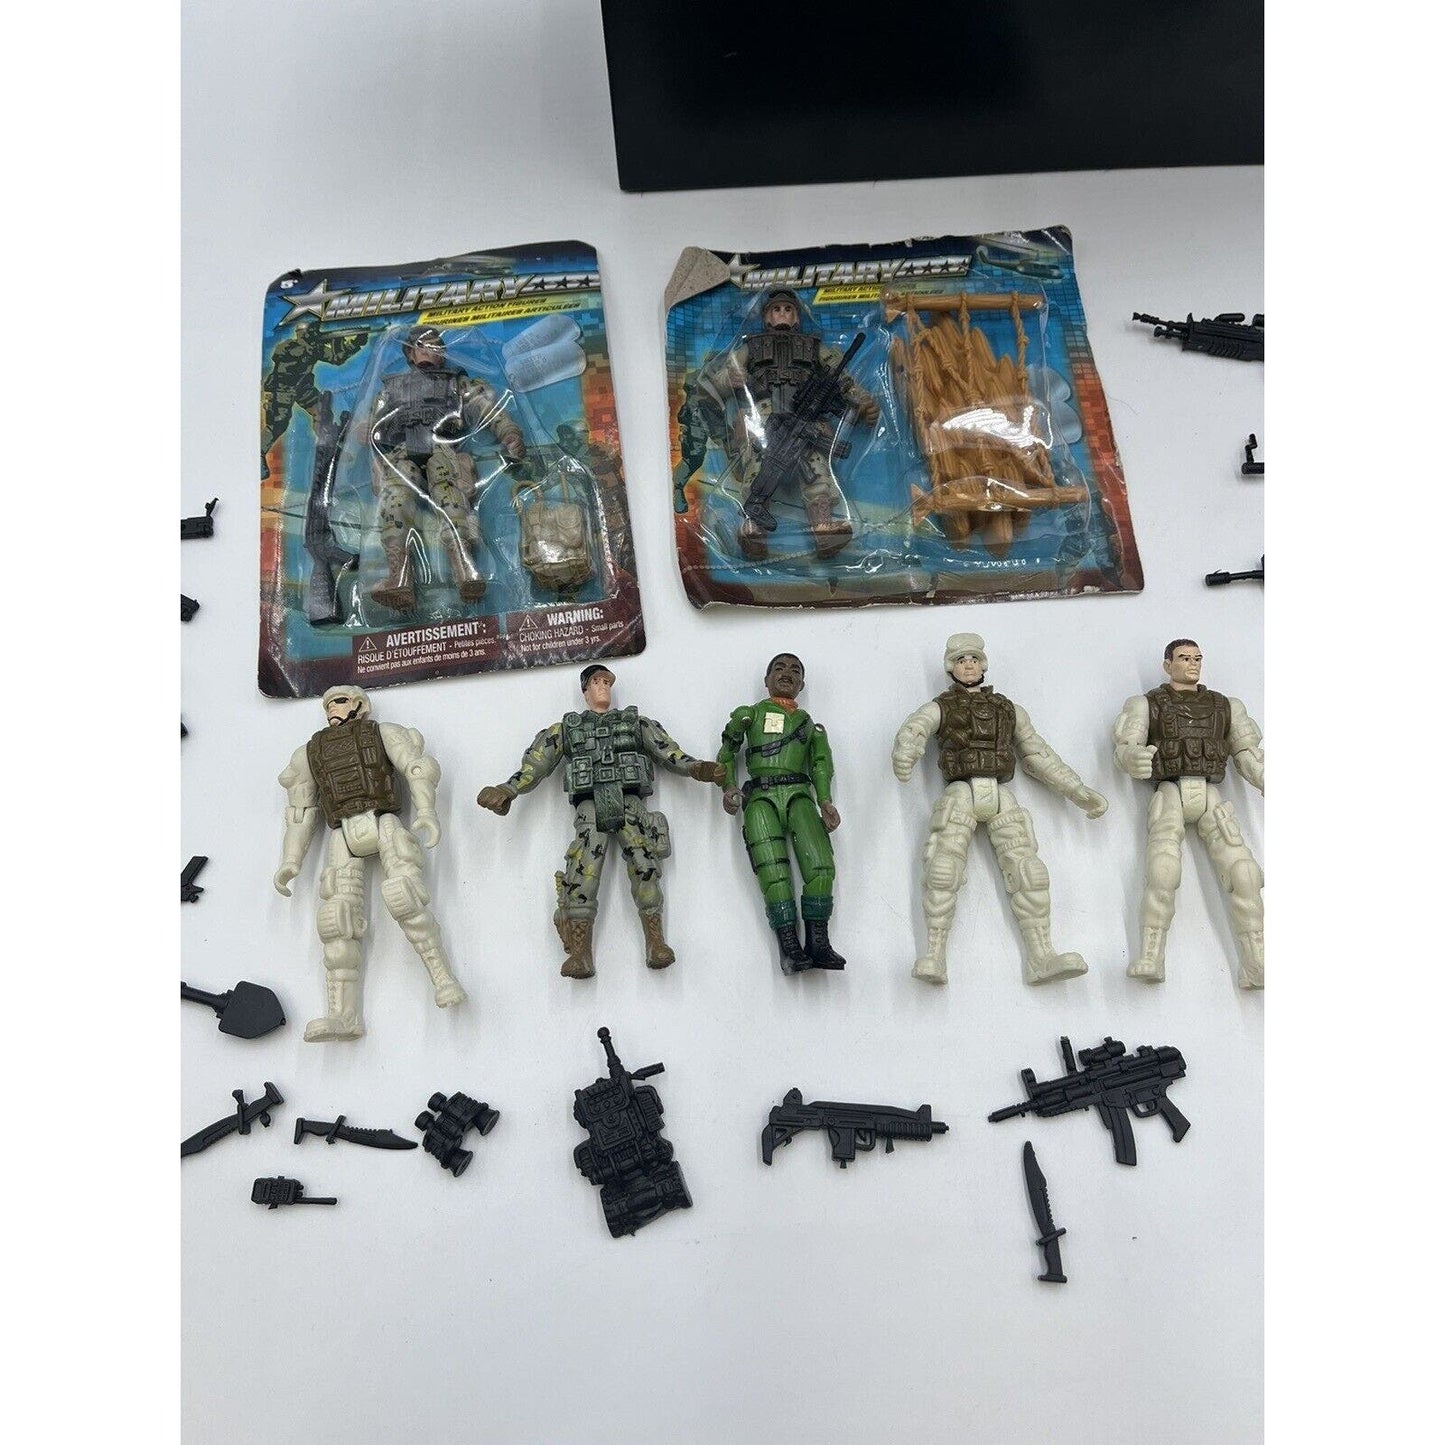 LOT OF Vintage Chap Mei 4" Soldiers Action Figures, Weapons, Vehicle & More